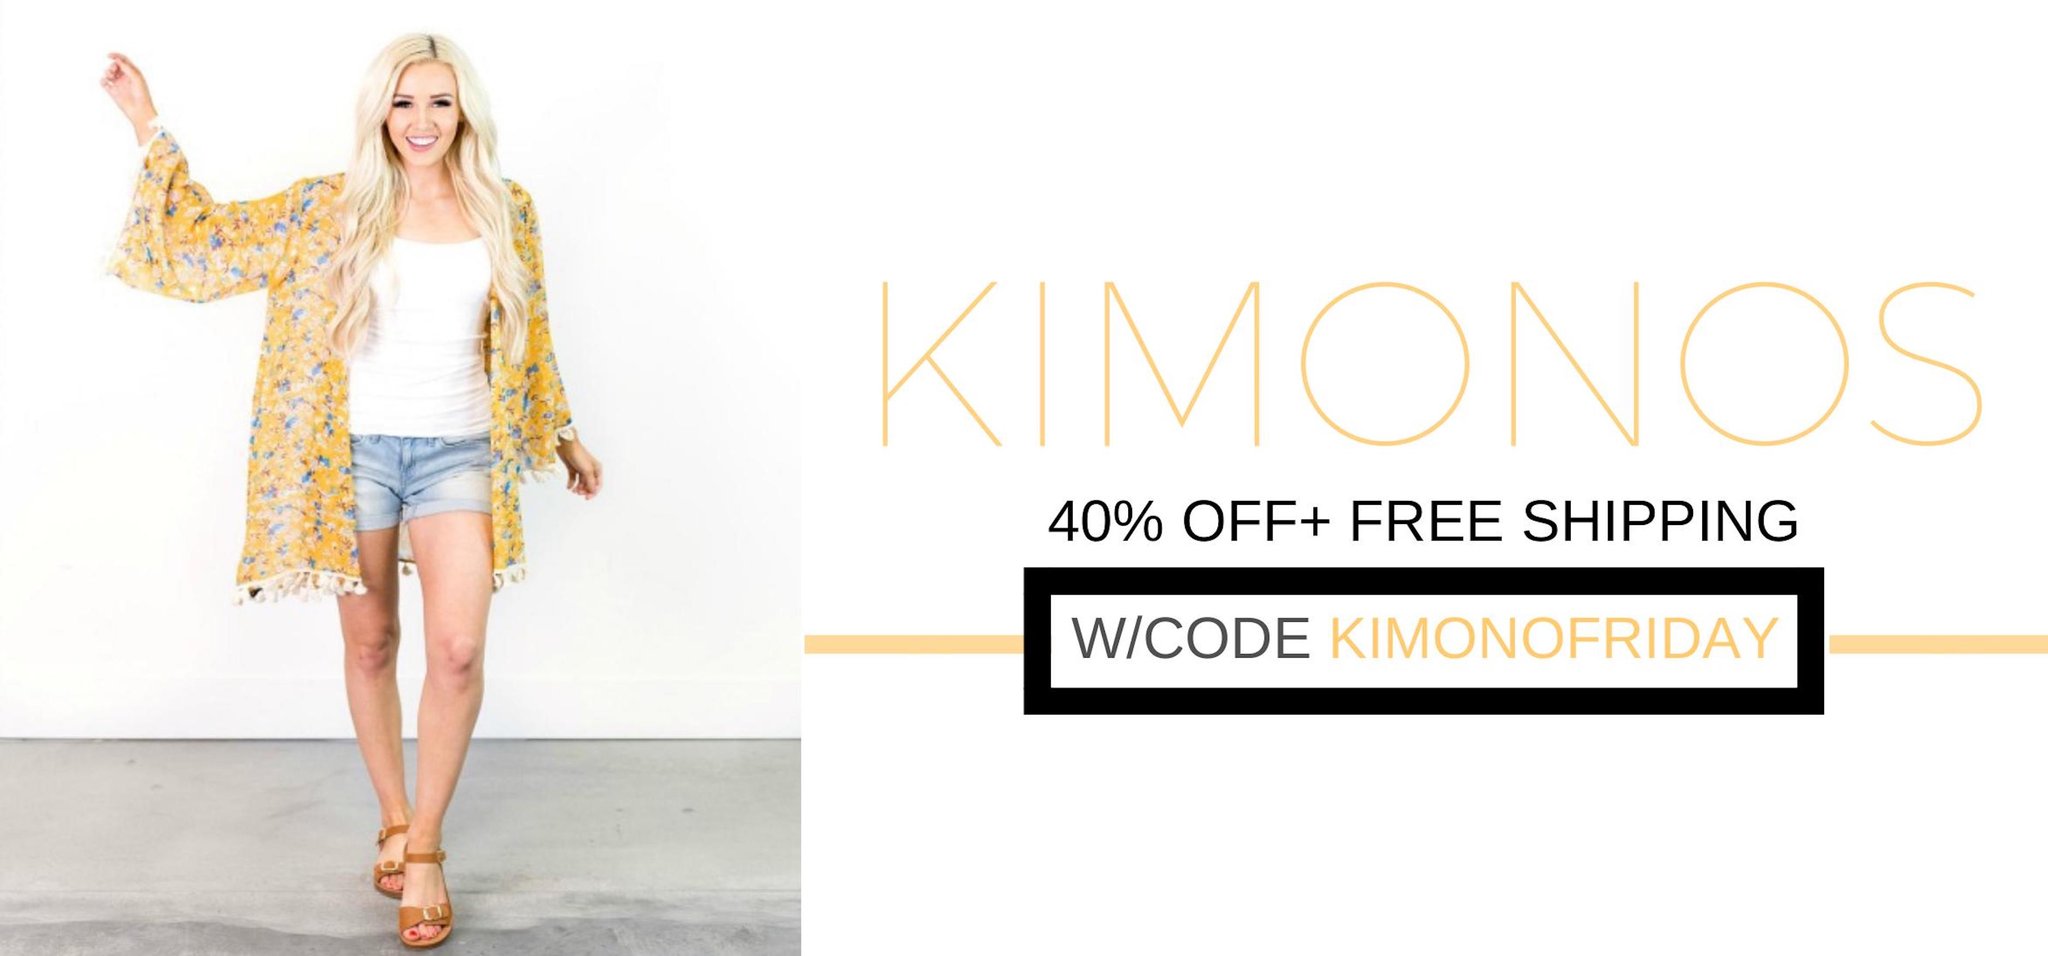 Still Available at Cents of Style! 40% off Kimonos! Free Shipping!